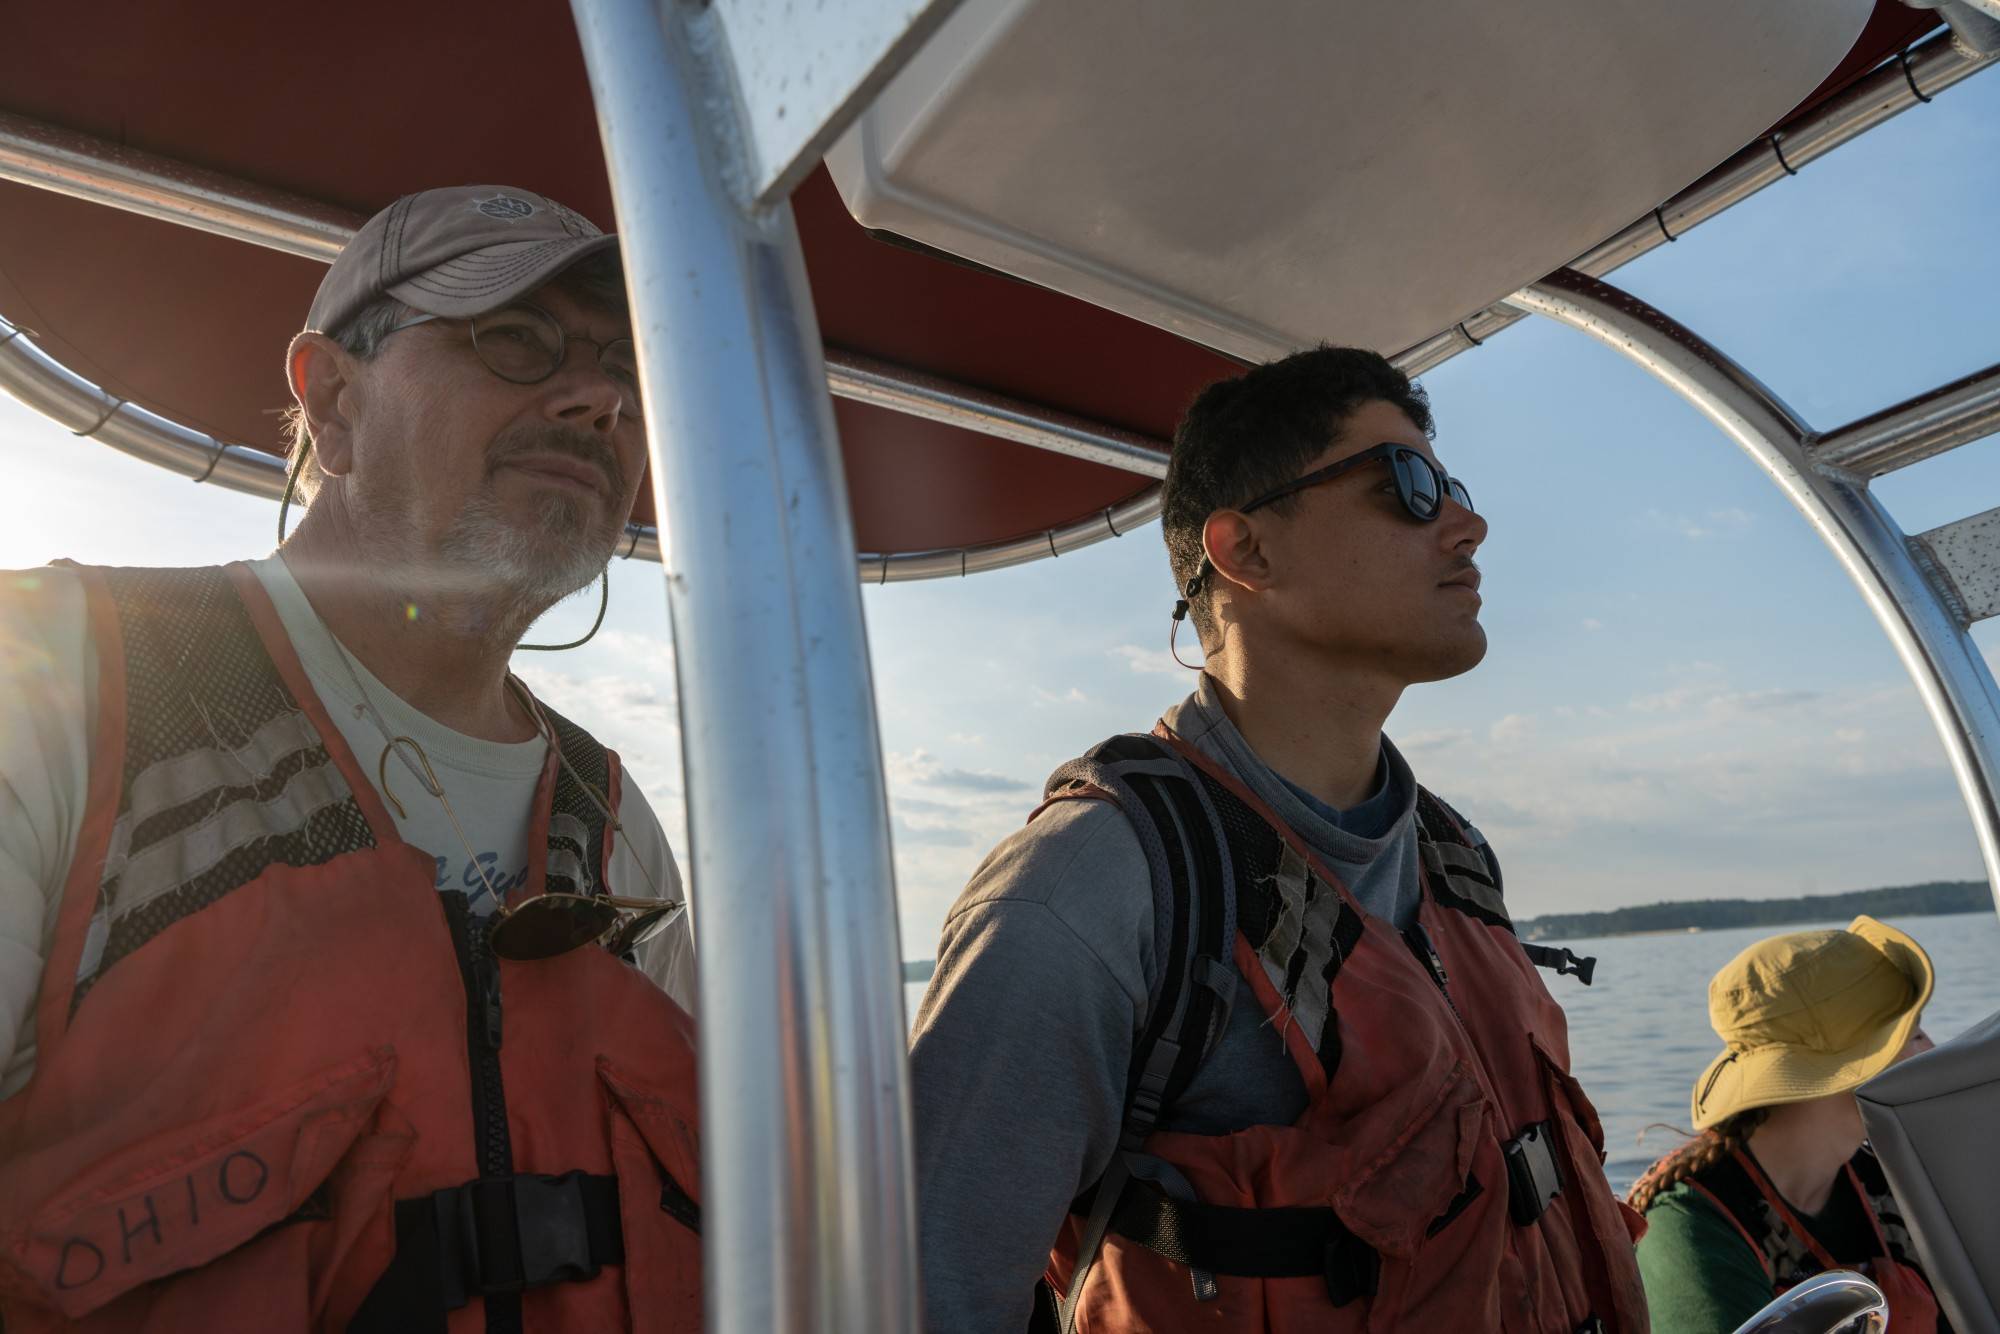 Graduate Student David Cole has participated in Terrapins summer research program with Dr Roosenberg for three consecutive summers, affording him the privileged position of helmsman on the crew.